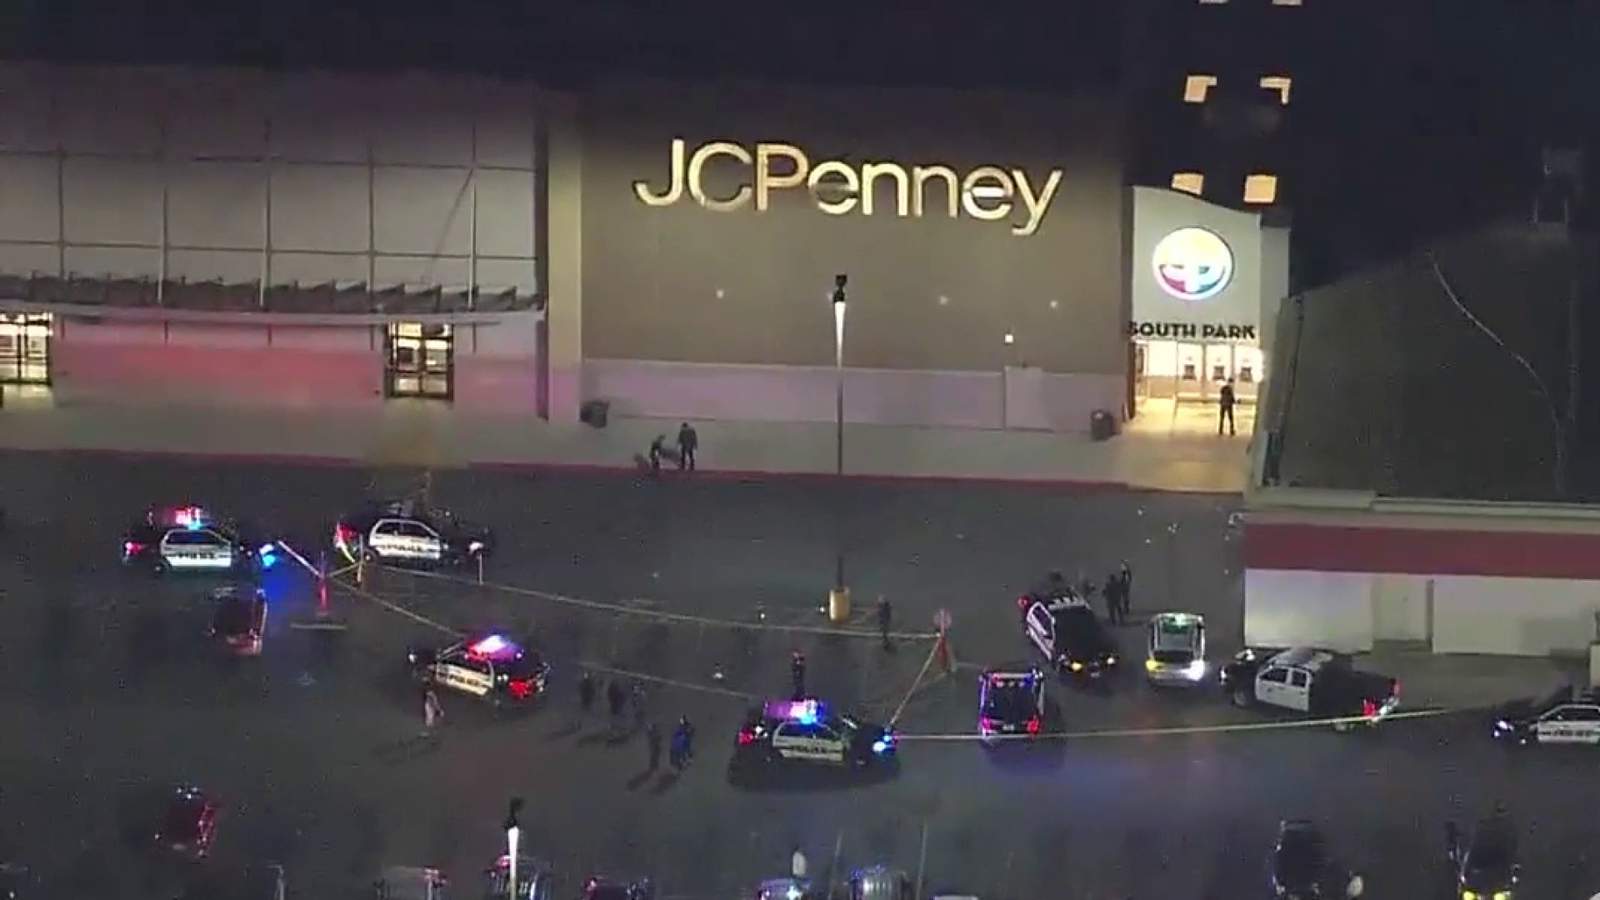 4 victims of South Park Mall shooting were targeted, SAPD says